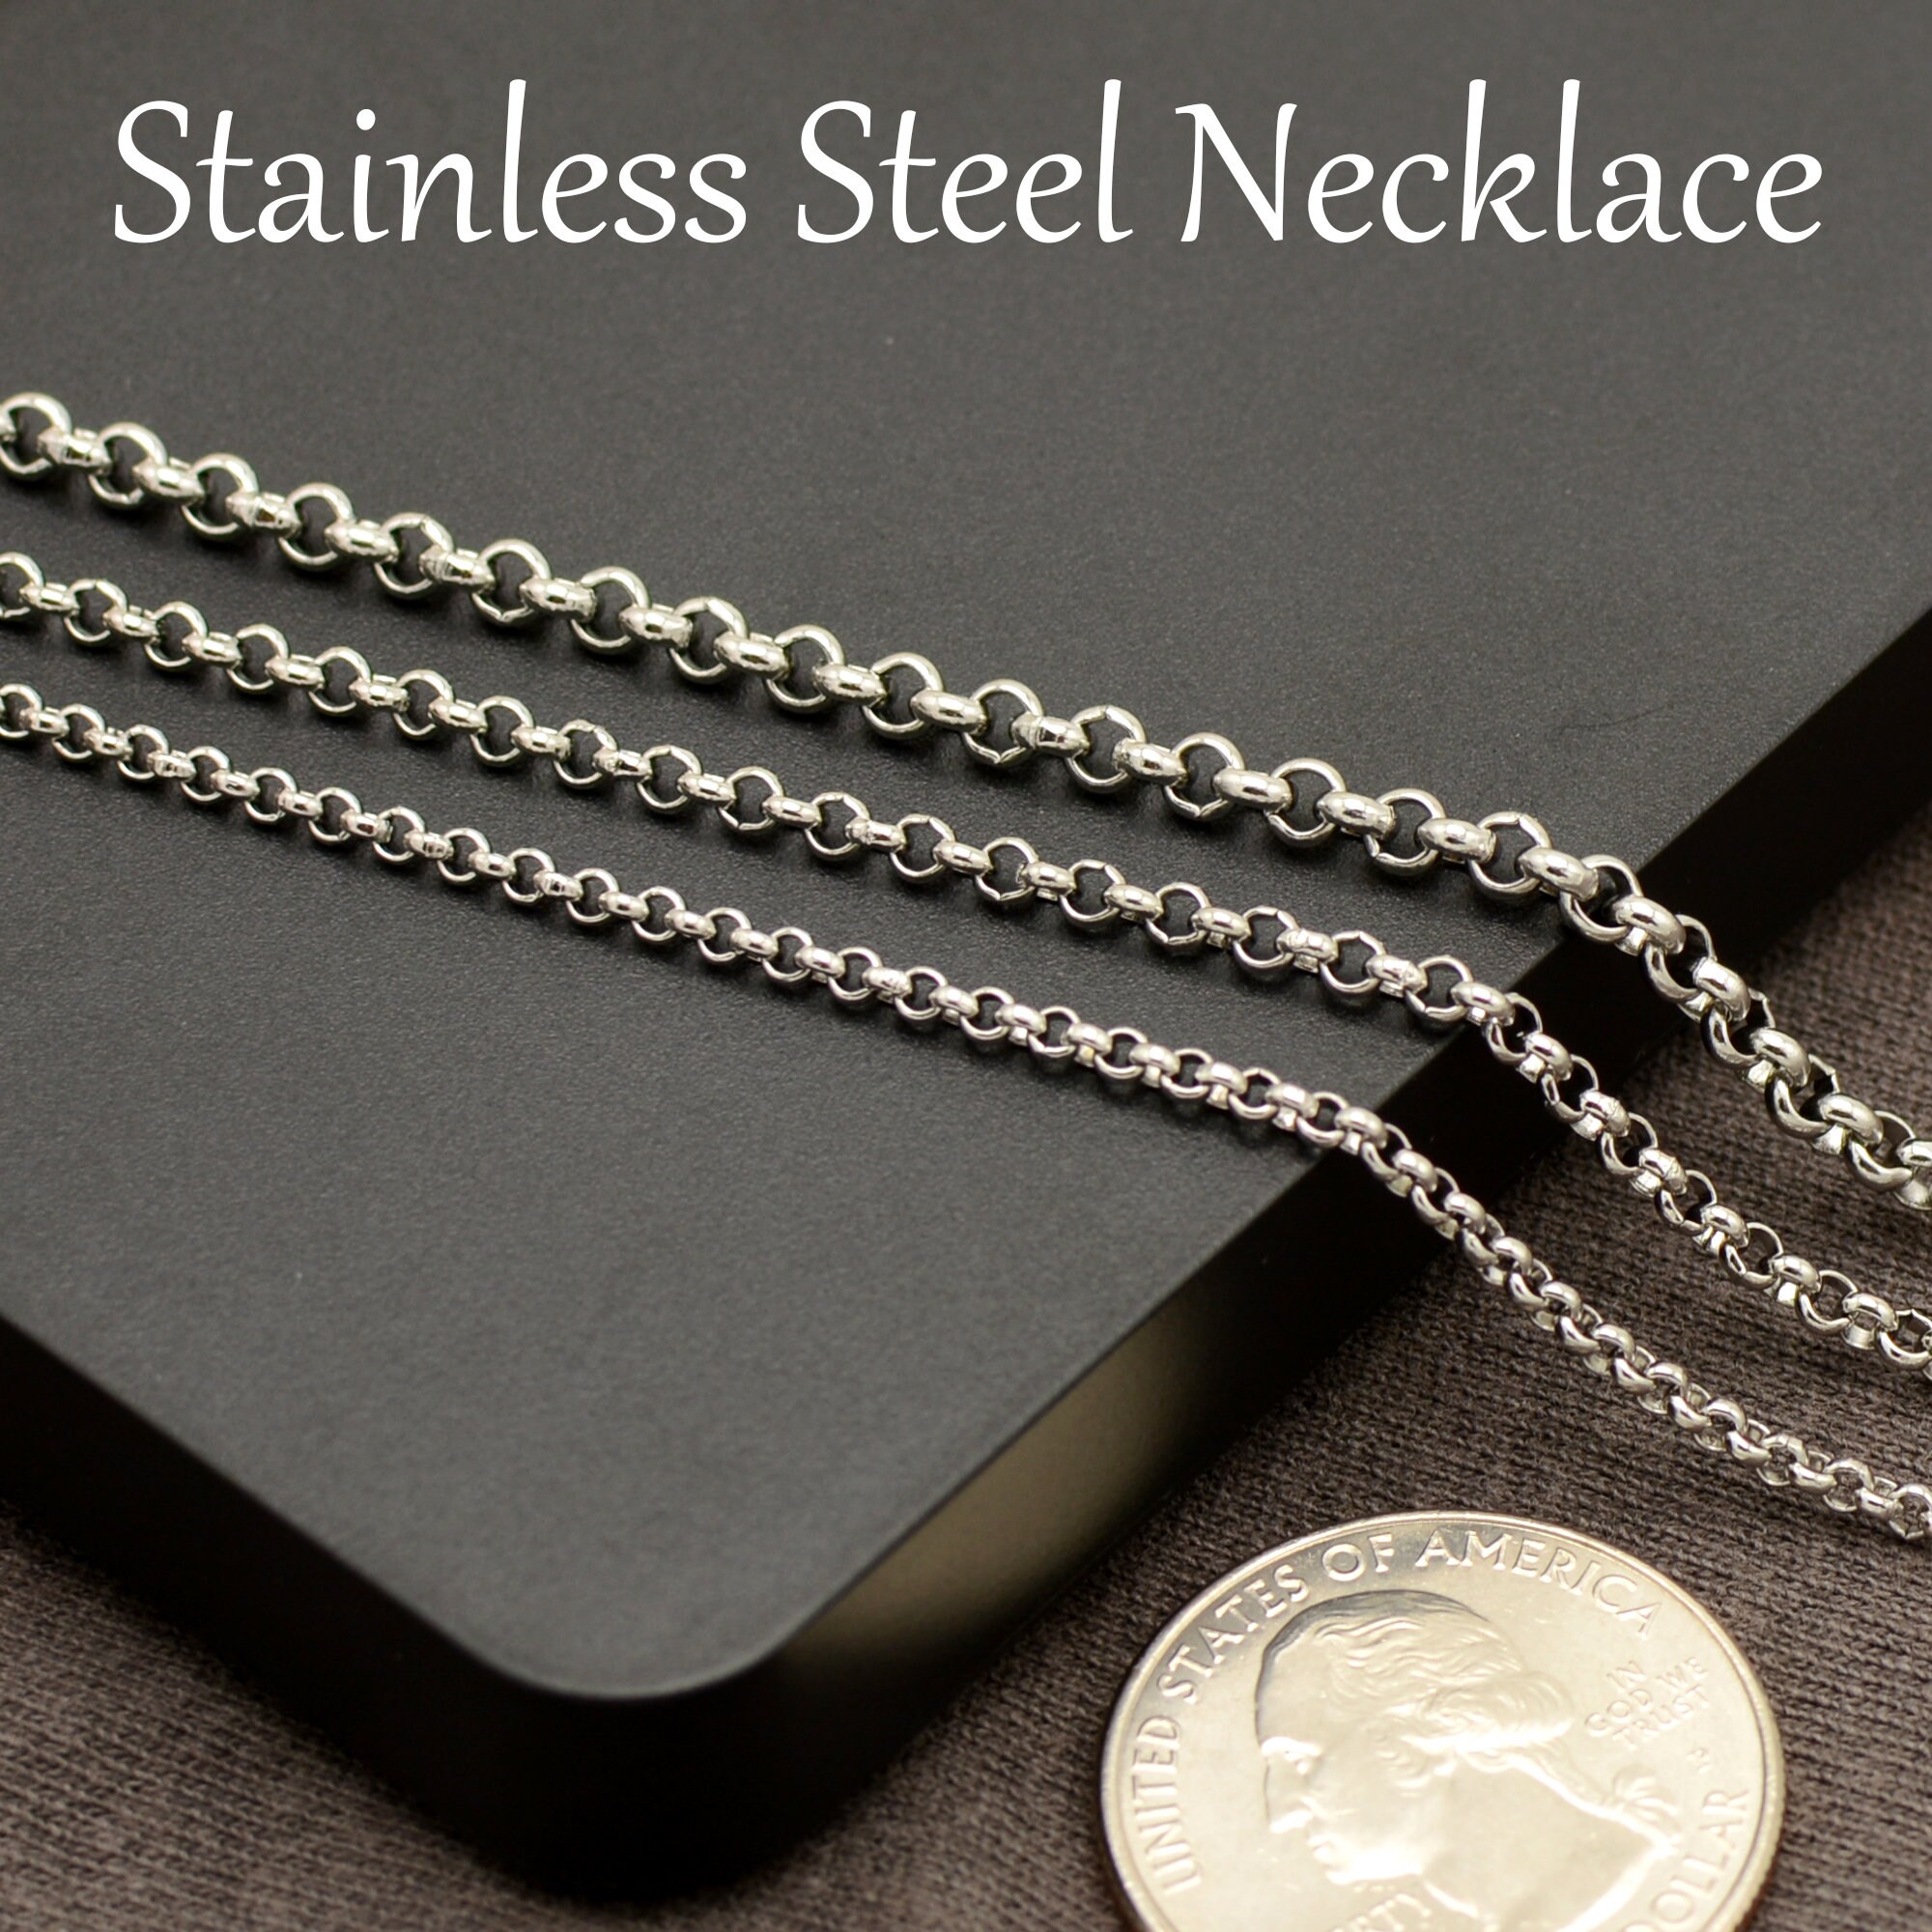 10/50 X Stainless Steel Necklace Chain, Rolo Chain Necklace Choker,  Stainless Steel Rolo Chain, Stainless Steel Chain Necklace for Women Men 